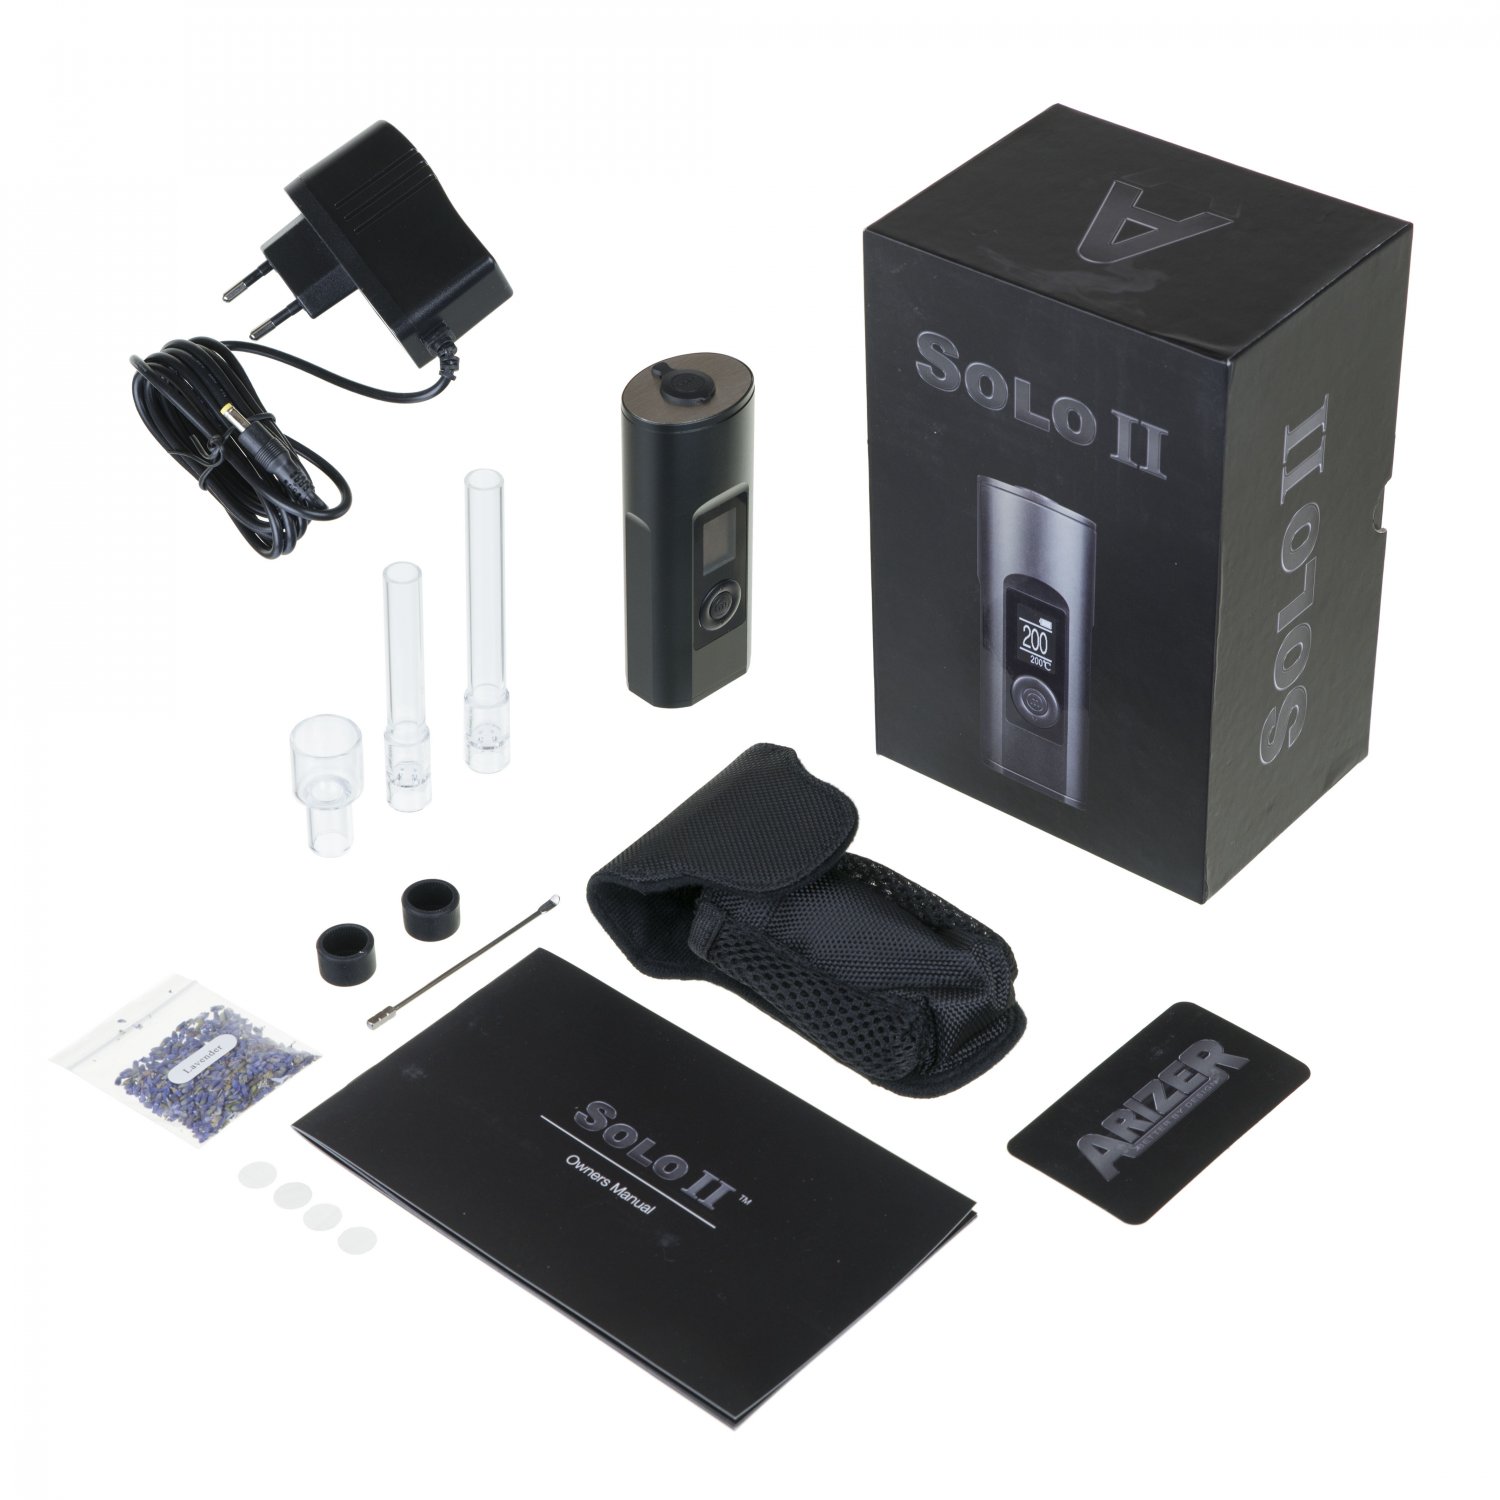 Arizer Solo ll unboxed